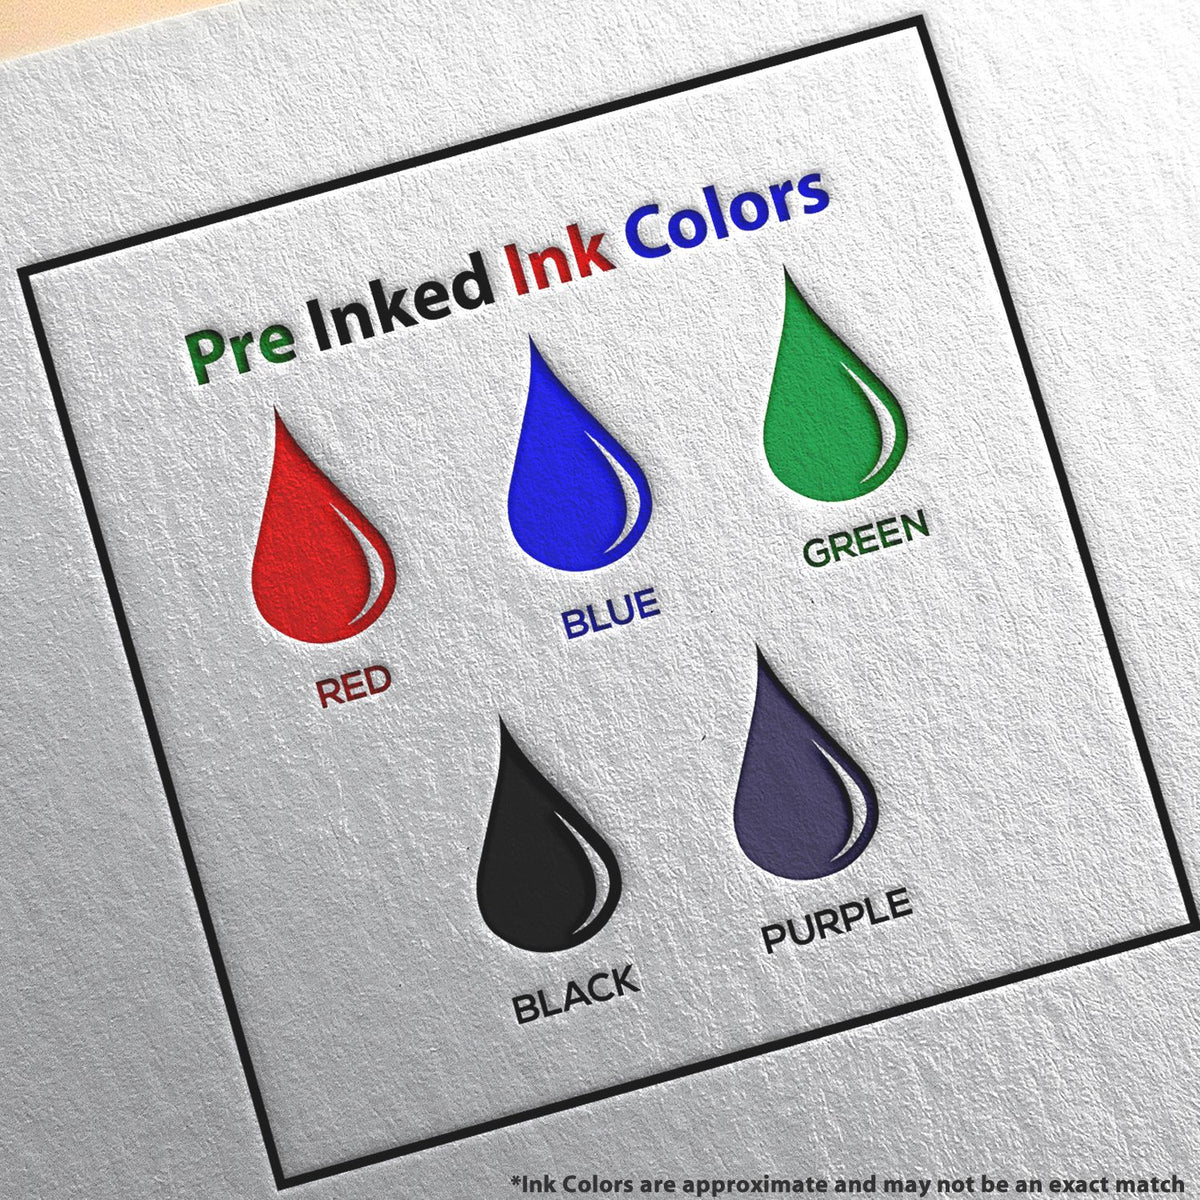 A picture showing the different ink colors or hues available for the Slim Pre-Inked South Dakota Architect Seal Stamp product.